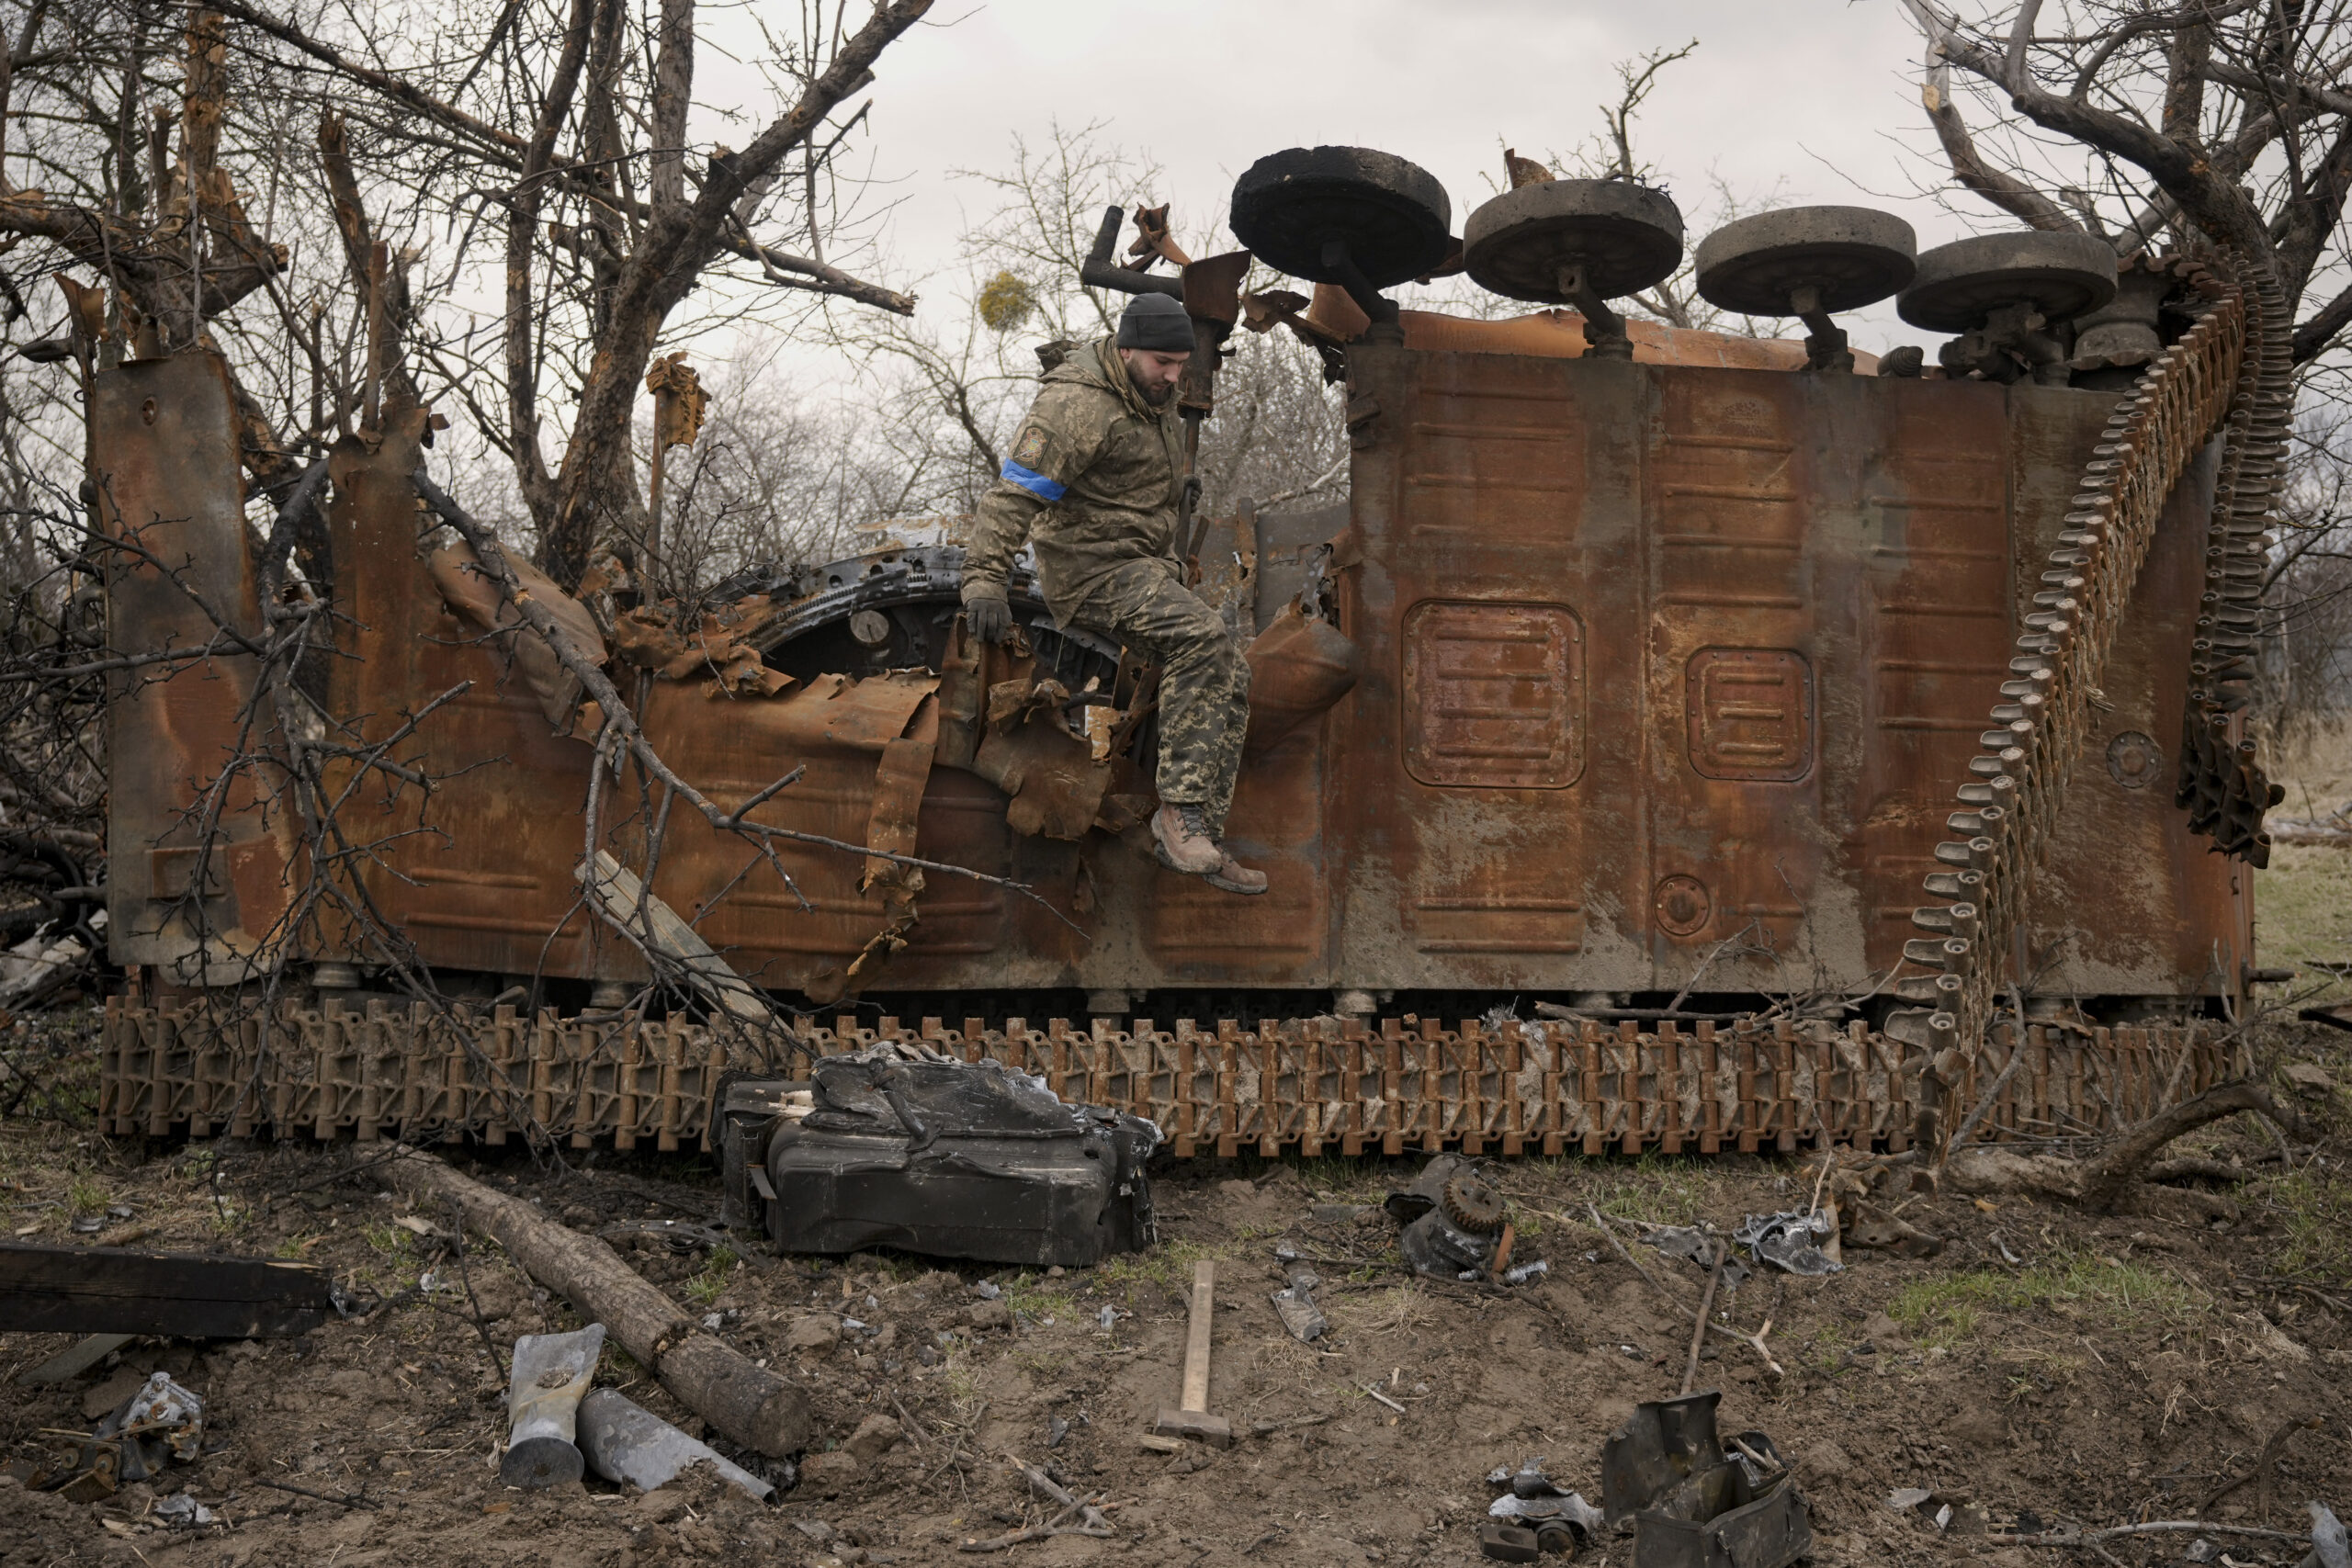 A Ukrainian serviceman jumps from a destroyed Russian fighting vehicle after collecting parts and ammunition in the village of Andriivka, Ukraine, heavily affected by fighting between Russian and Ukrainian forces, Wednesday, April 6, 2022. Several buildings in the village were reduced to mounds of bricks and corrugated metal and residents struggle without heat, electricity or cooking gas. (AP Photo/Vadim Ghirda)